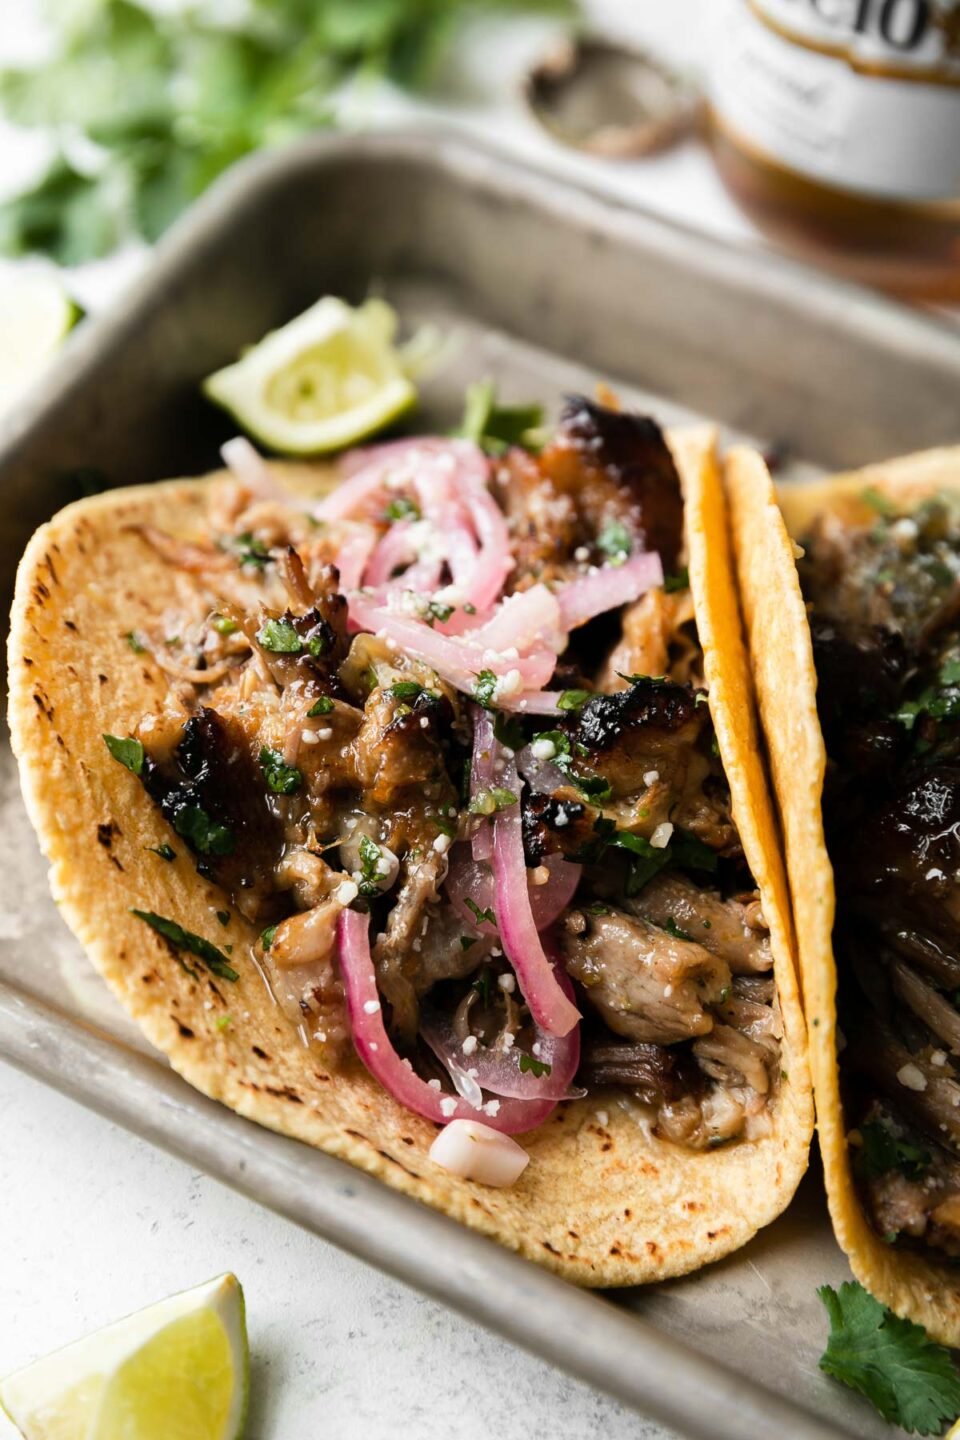 A side angle shot of beer braised carnitas tacos topped with pickled red onions, fresh chopped cilantro, queso fresco, with lime wedges on the side. The tacos sit atop a parchment paper lined aluminum baking sheet that sits atop a creamy white surface surrounded by lime wedges, a bouquet of fresh cilantro, a bottle of Modelo beer, and a loose beer bottle cap.